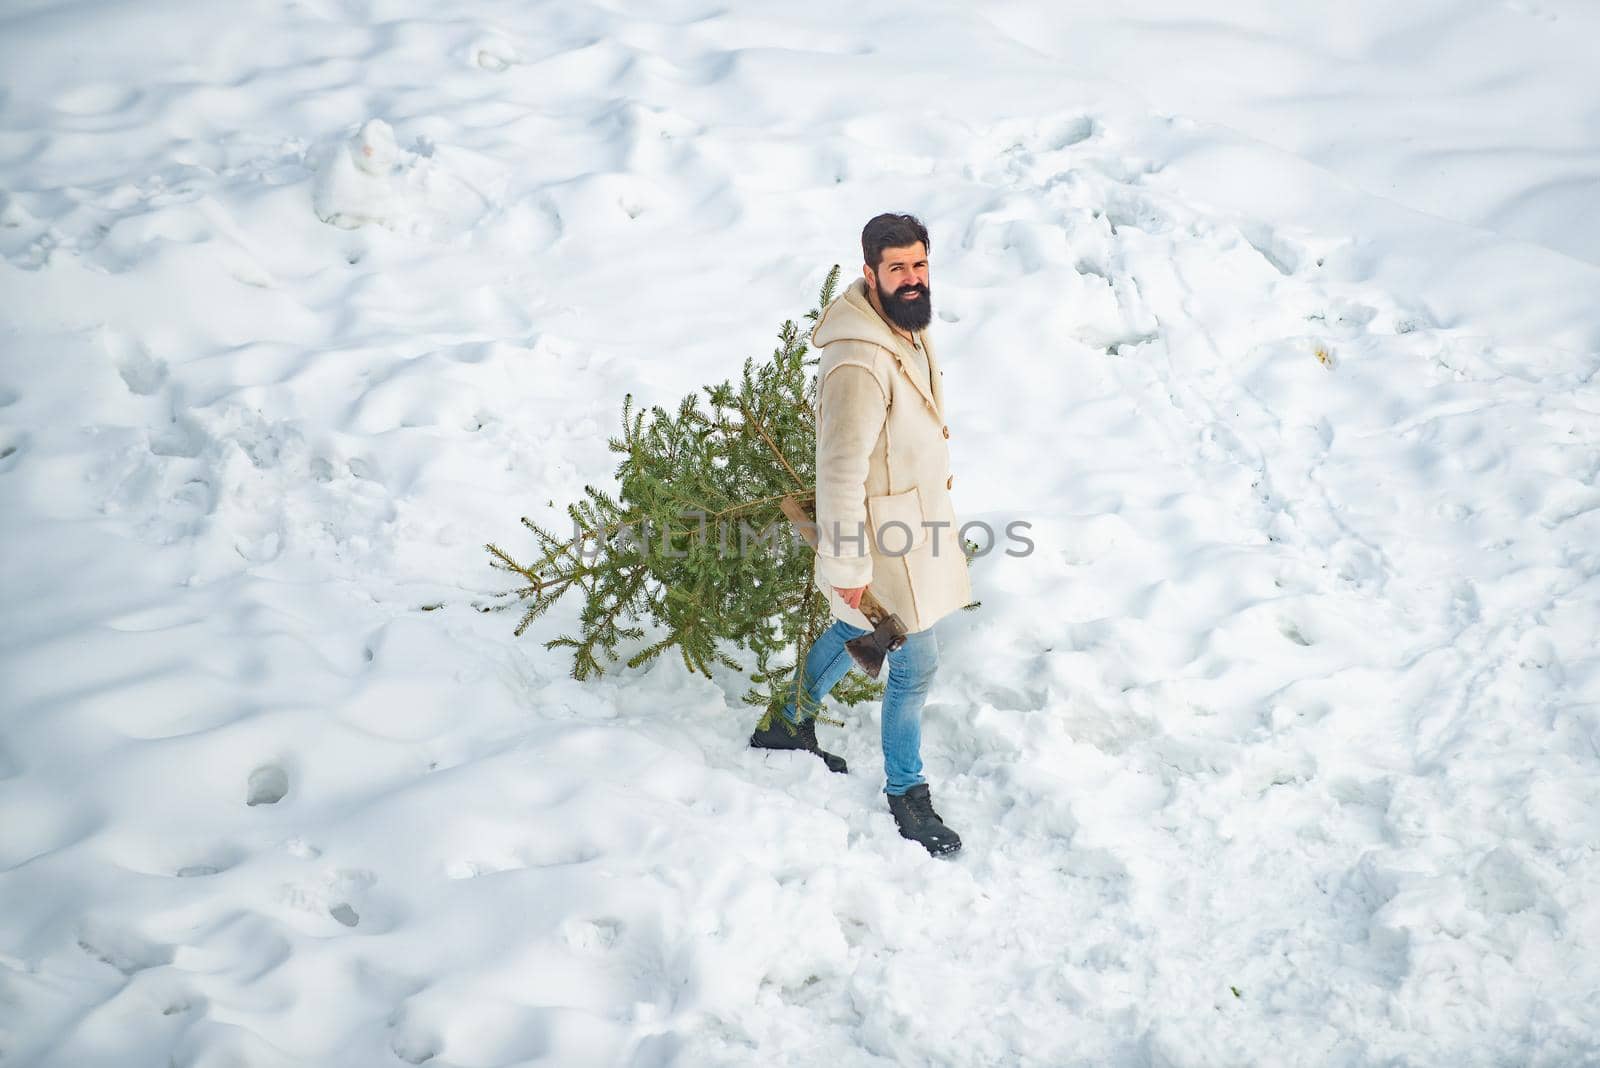 Man is going to cut a Christmas tree. Funny Santa man posing with axe and Christmas tree. Man with beard bears home a Christmas tree. Man is going to cut a Christmas tree